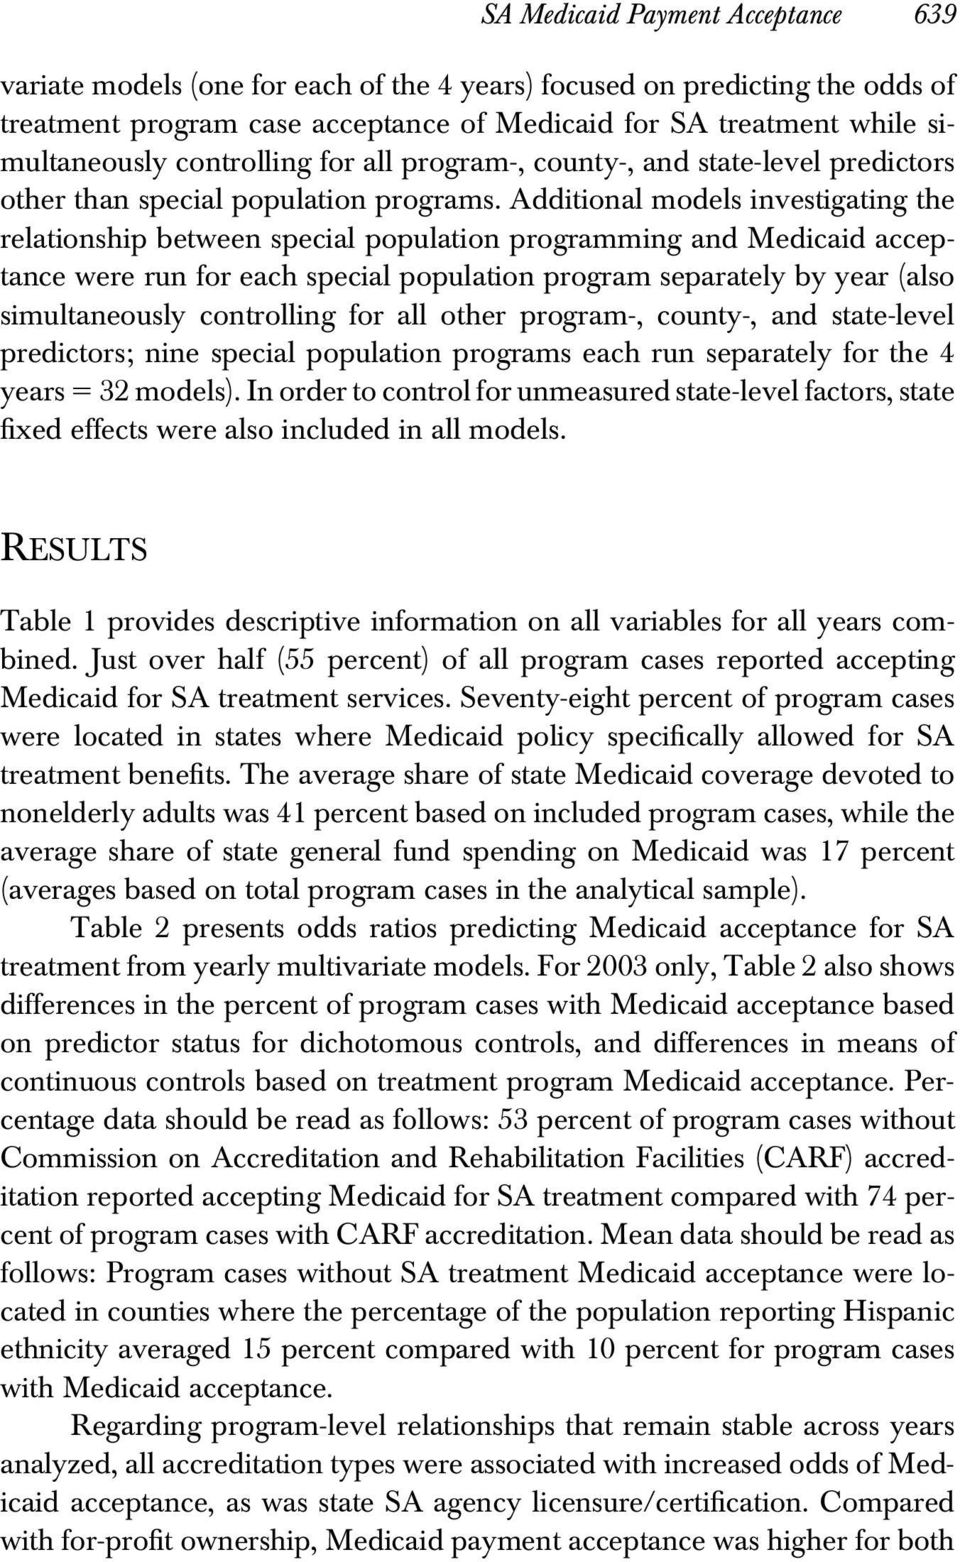 Additional models investigating the relationship between special population programming and Medicaid acceptance were run for each special population program separately by year (also simultaneously